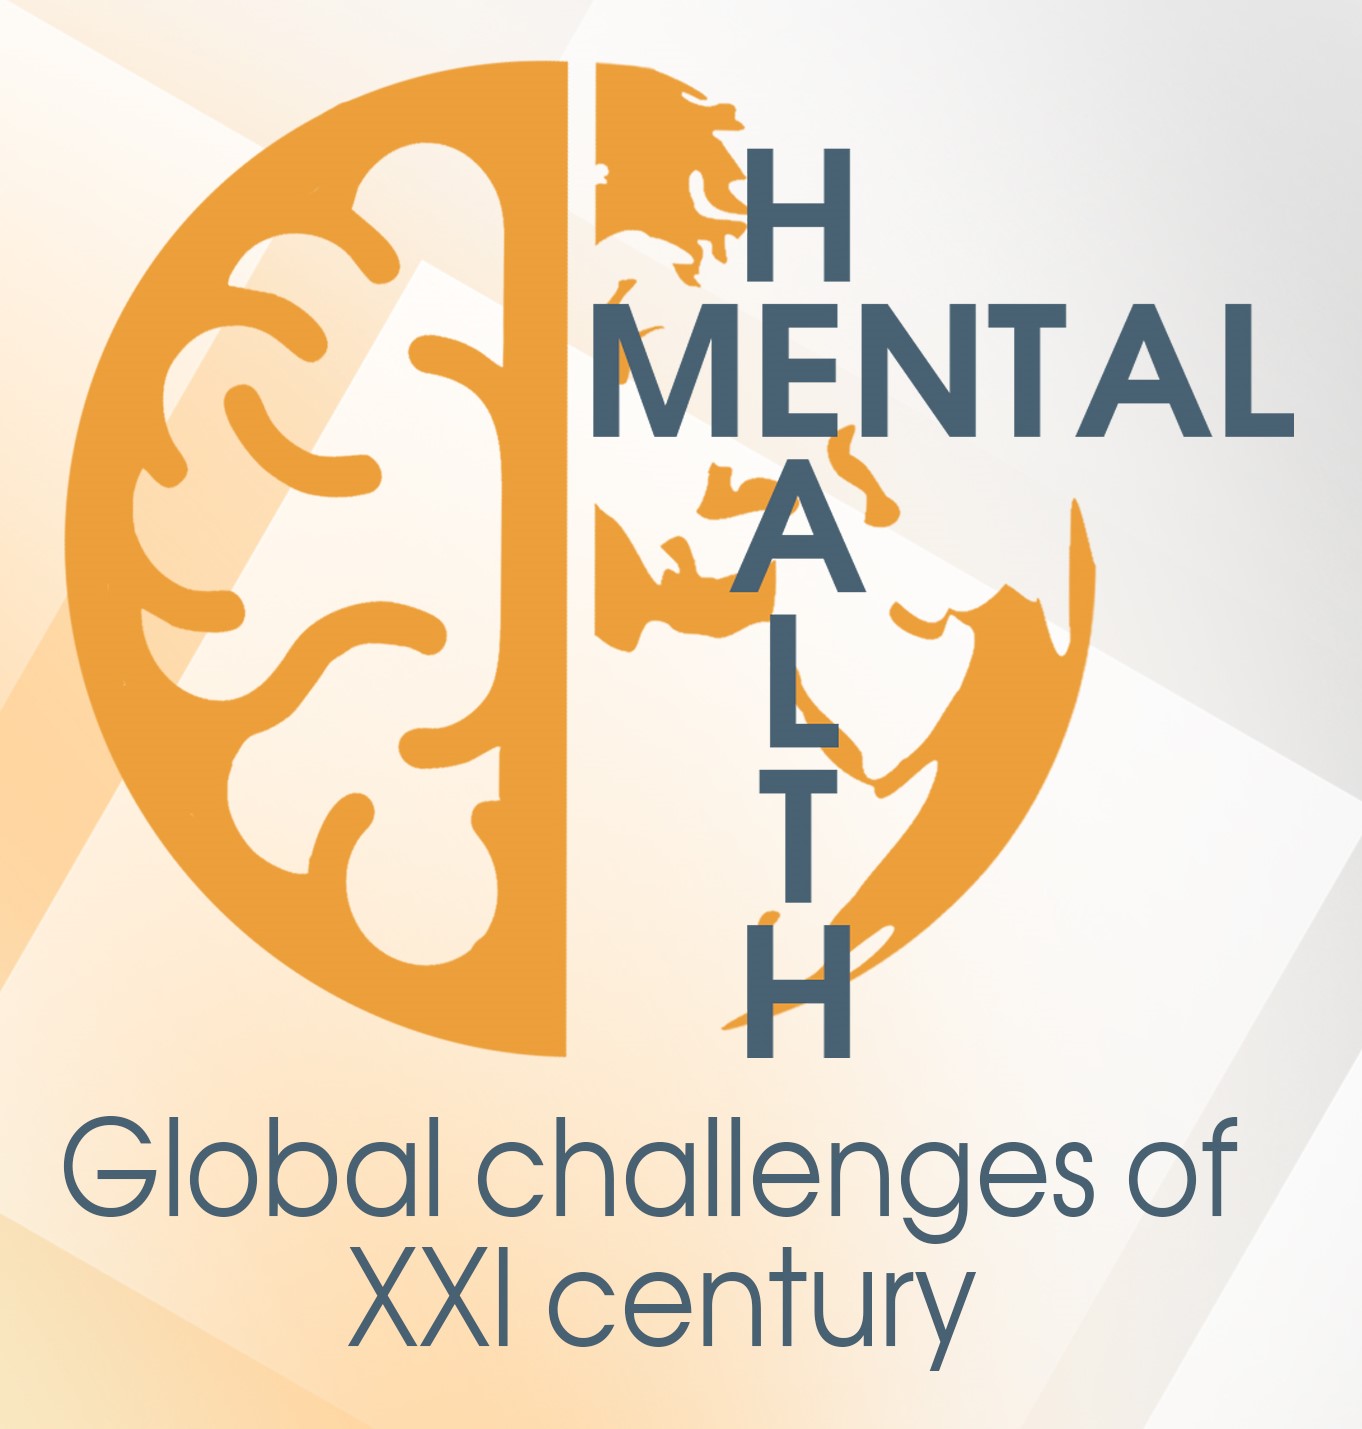 III INTERNATIONAL CONFERENCE ON MENTAL HEALTH CARE “Mental Health: Global challenges of XXI century”